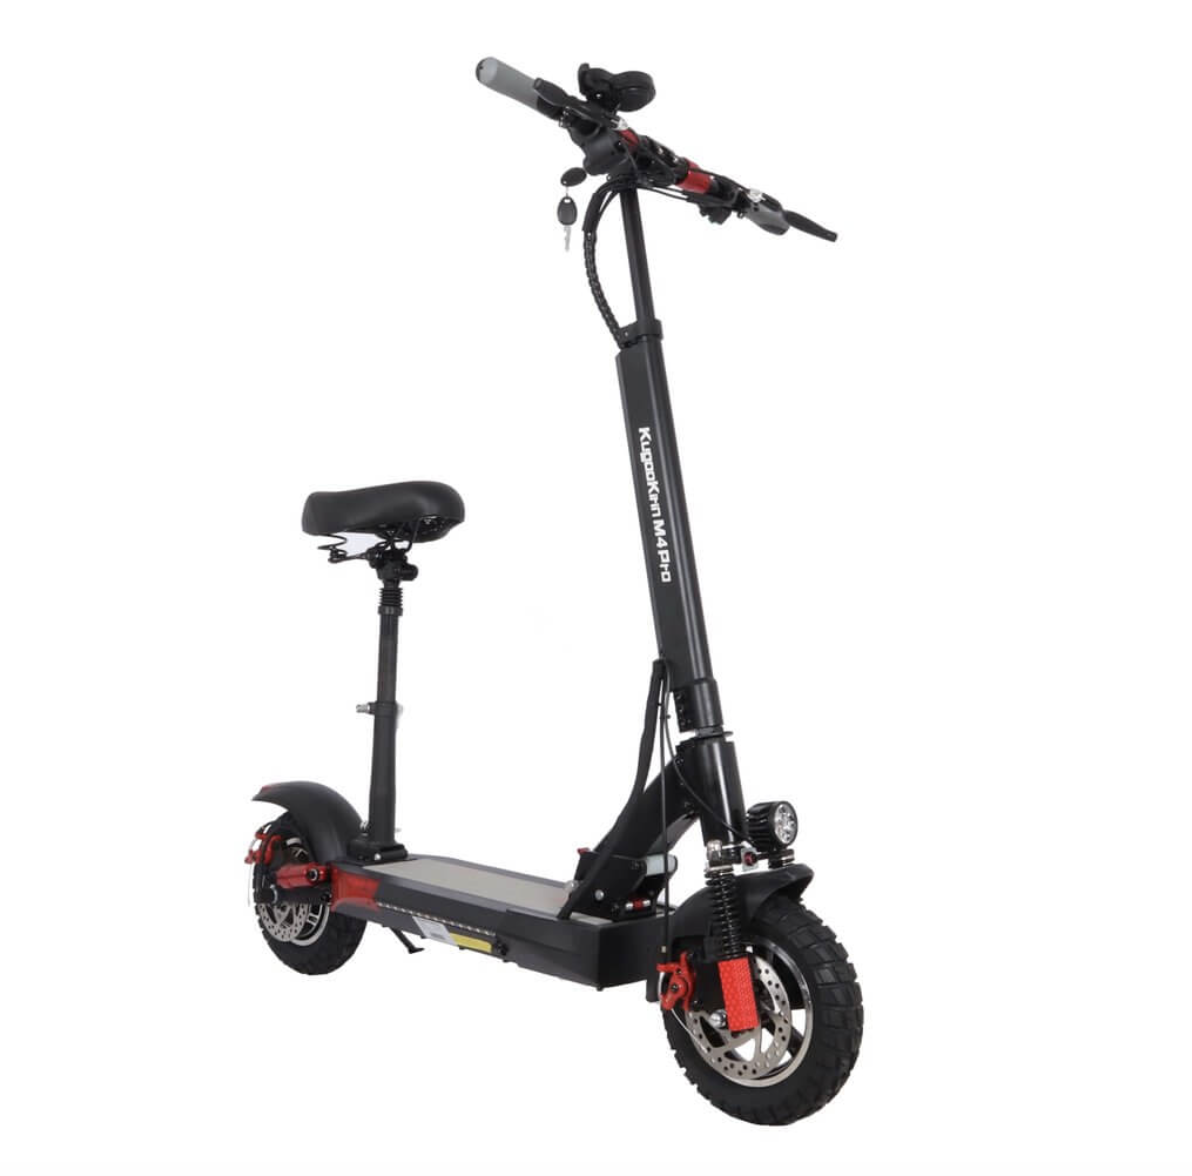 18Ah Battery KUGOO KIRIN M4 Pro Folding Electric Scooter 10" Pneumatic Tires 500W 48V Motor 3 Speed Modes Max 28 MPH(Free Shipping)